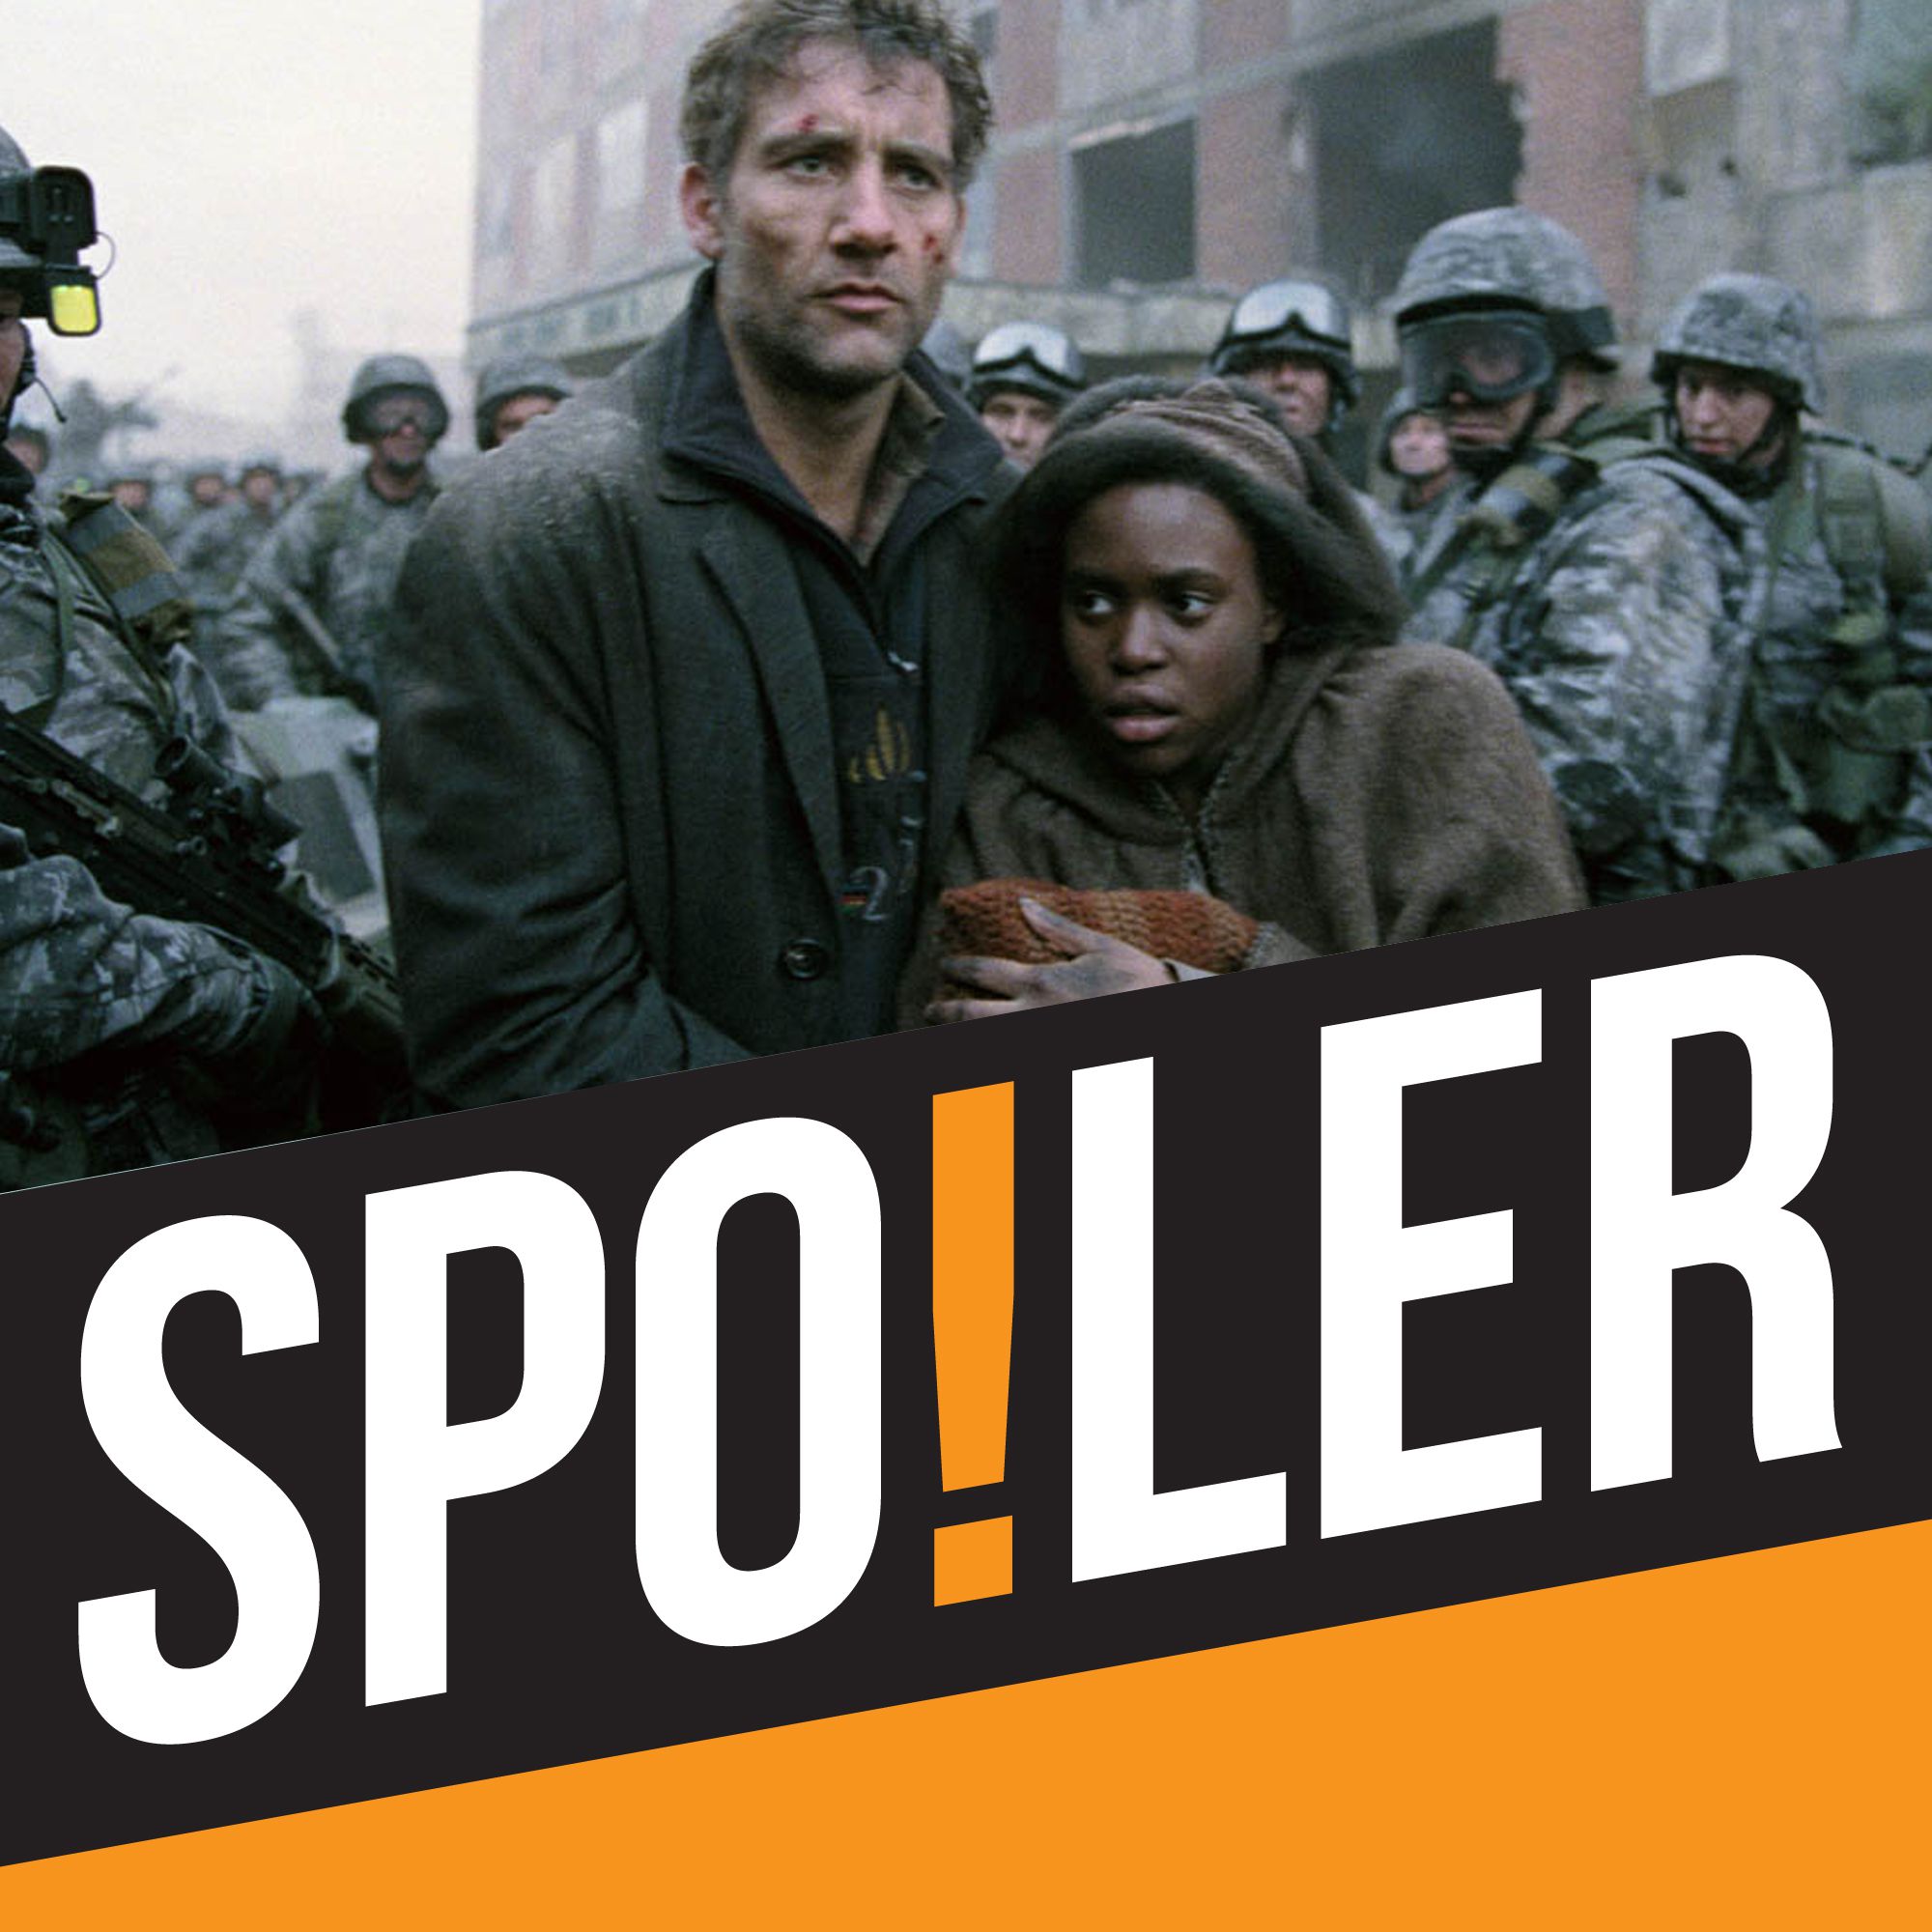 SPOILER Review: Children of Men based on the book by PD James